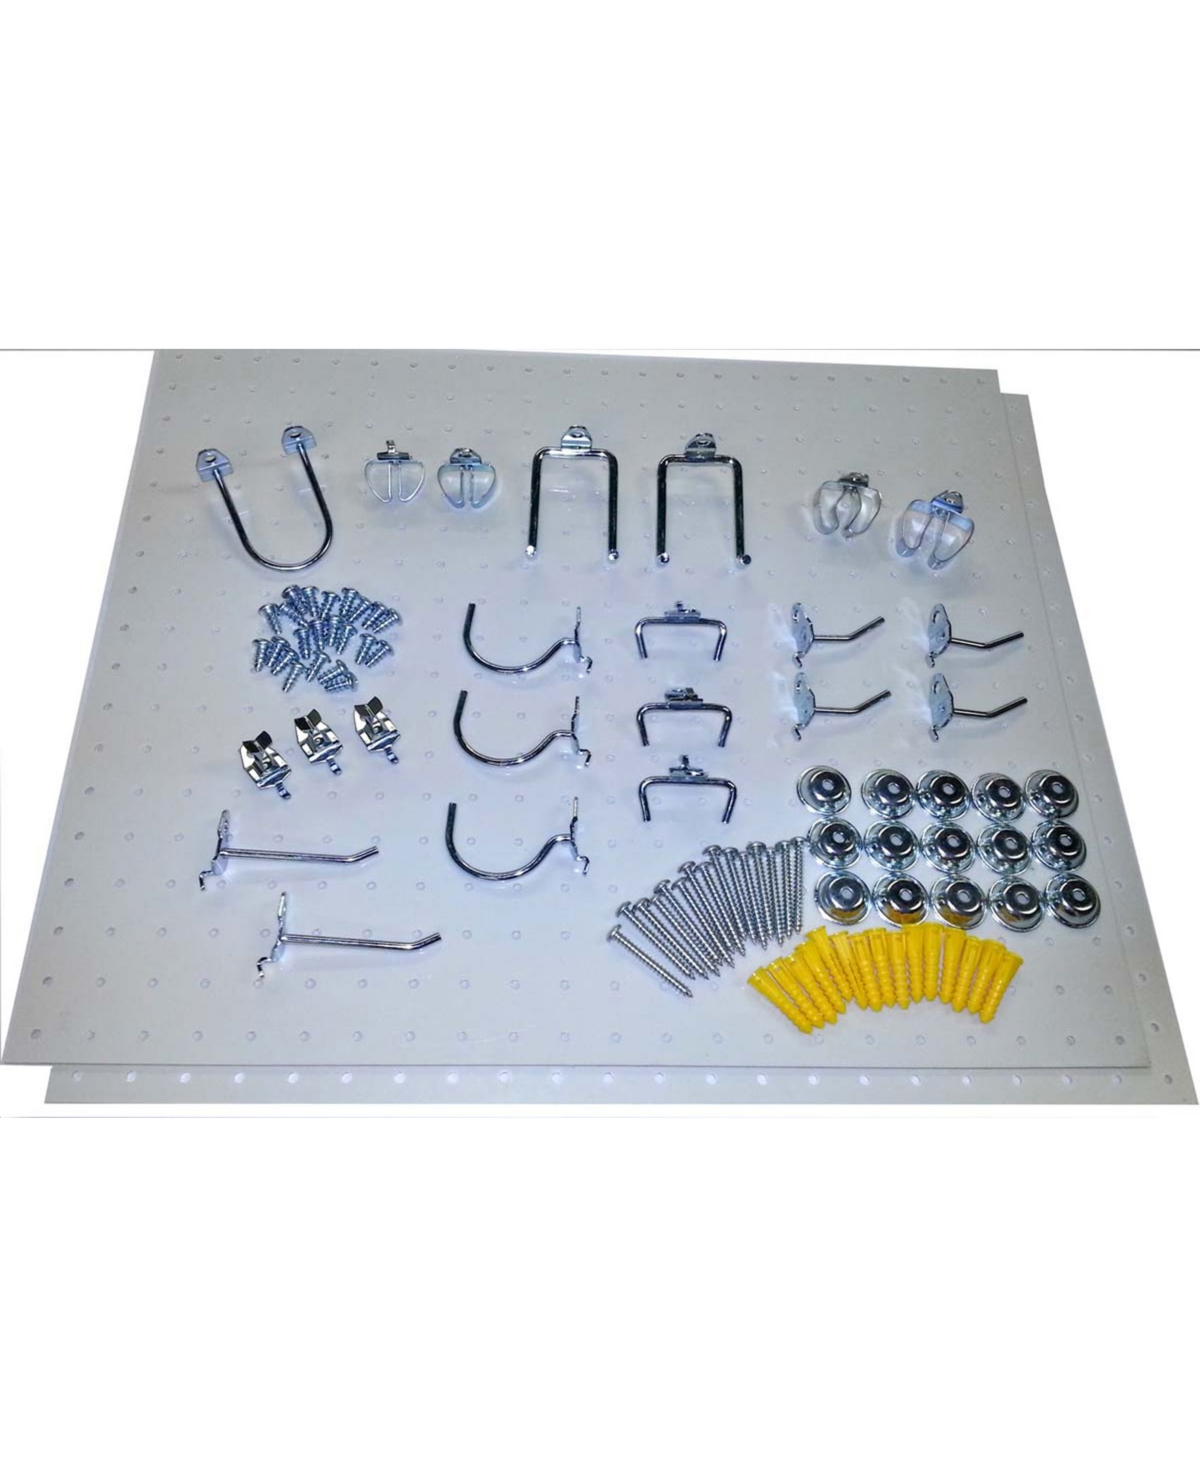 Triton Products Duraboard Pegboards with 22 Piece DuraHook Assortment and Wall Mounting Hardware